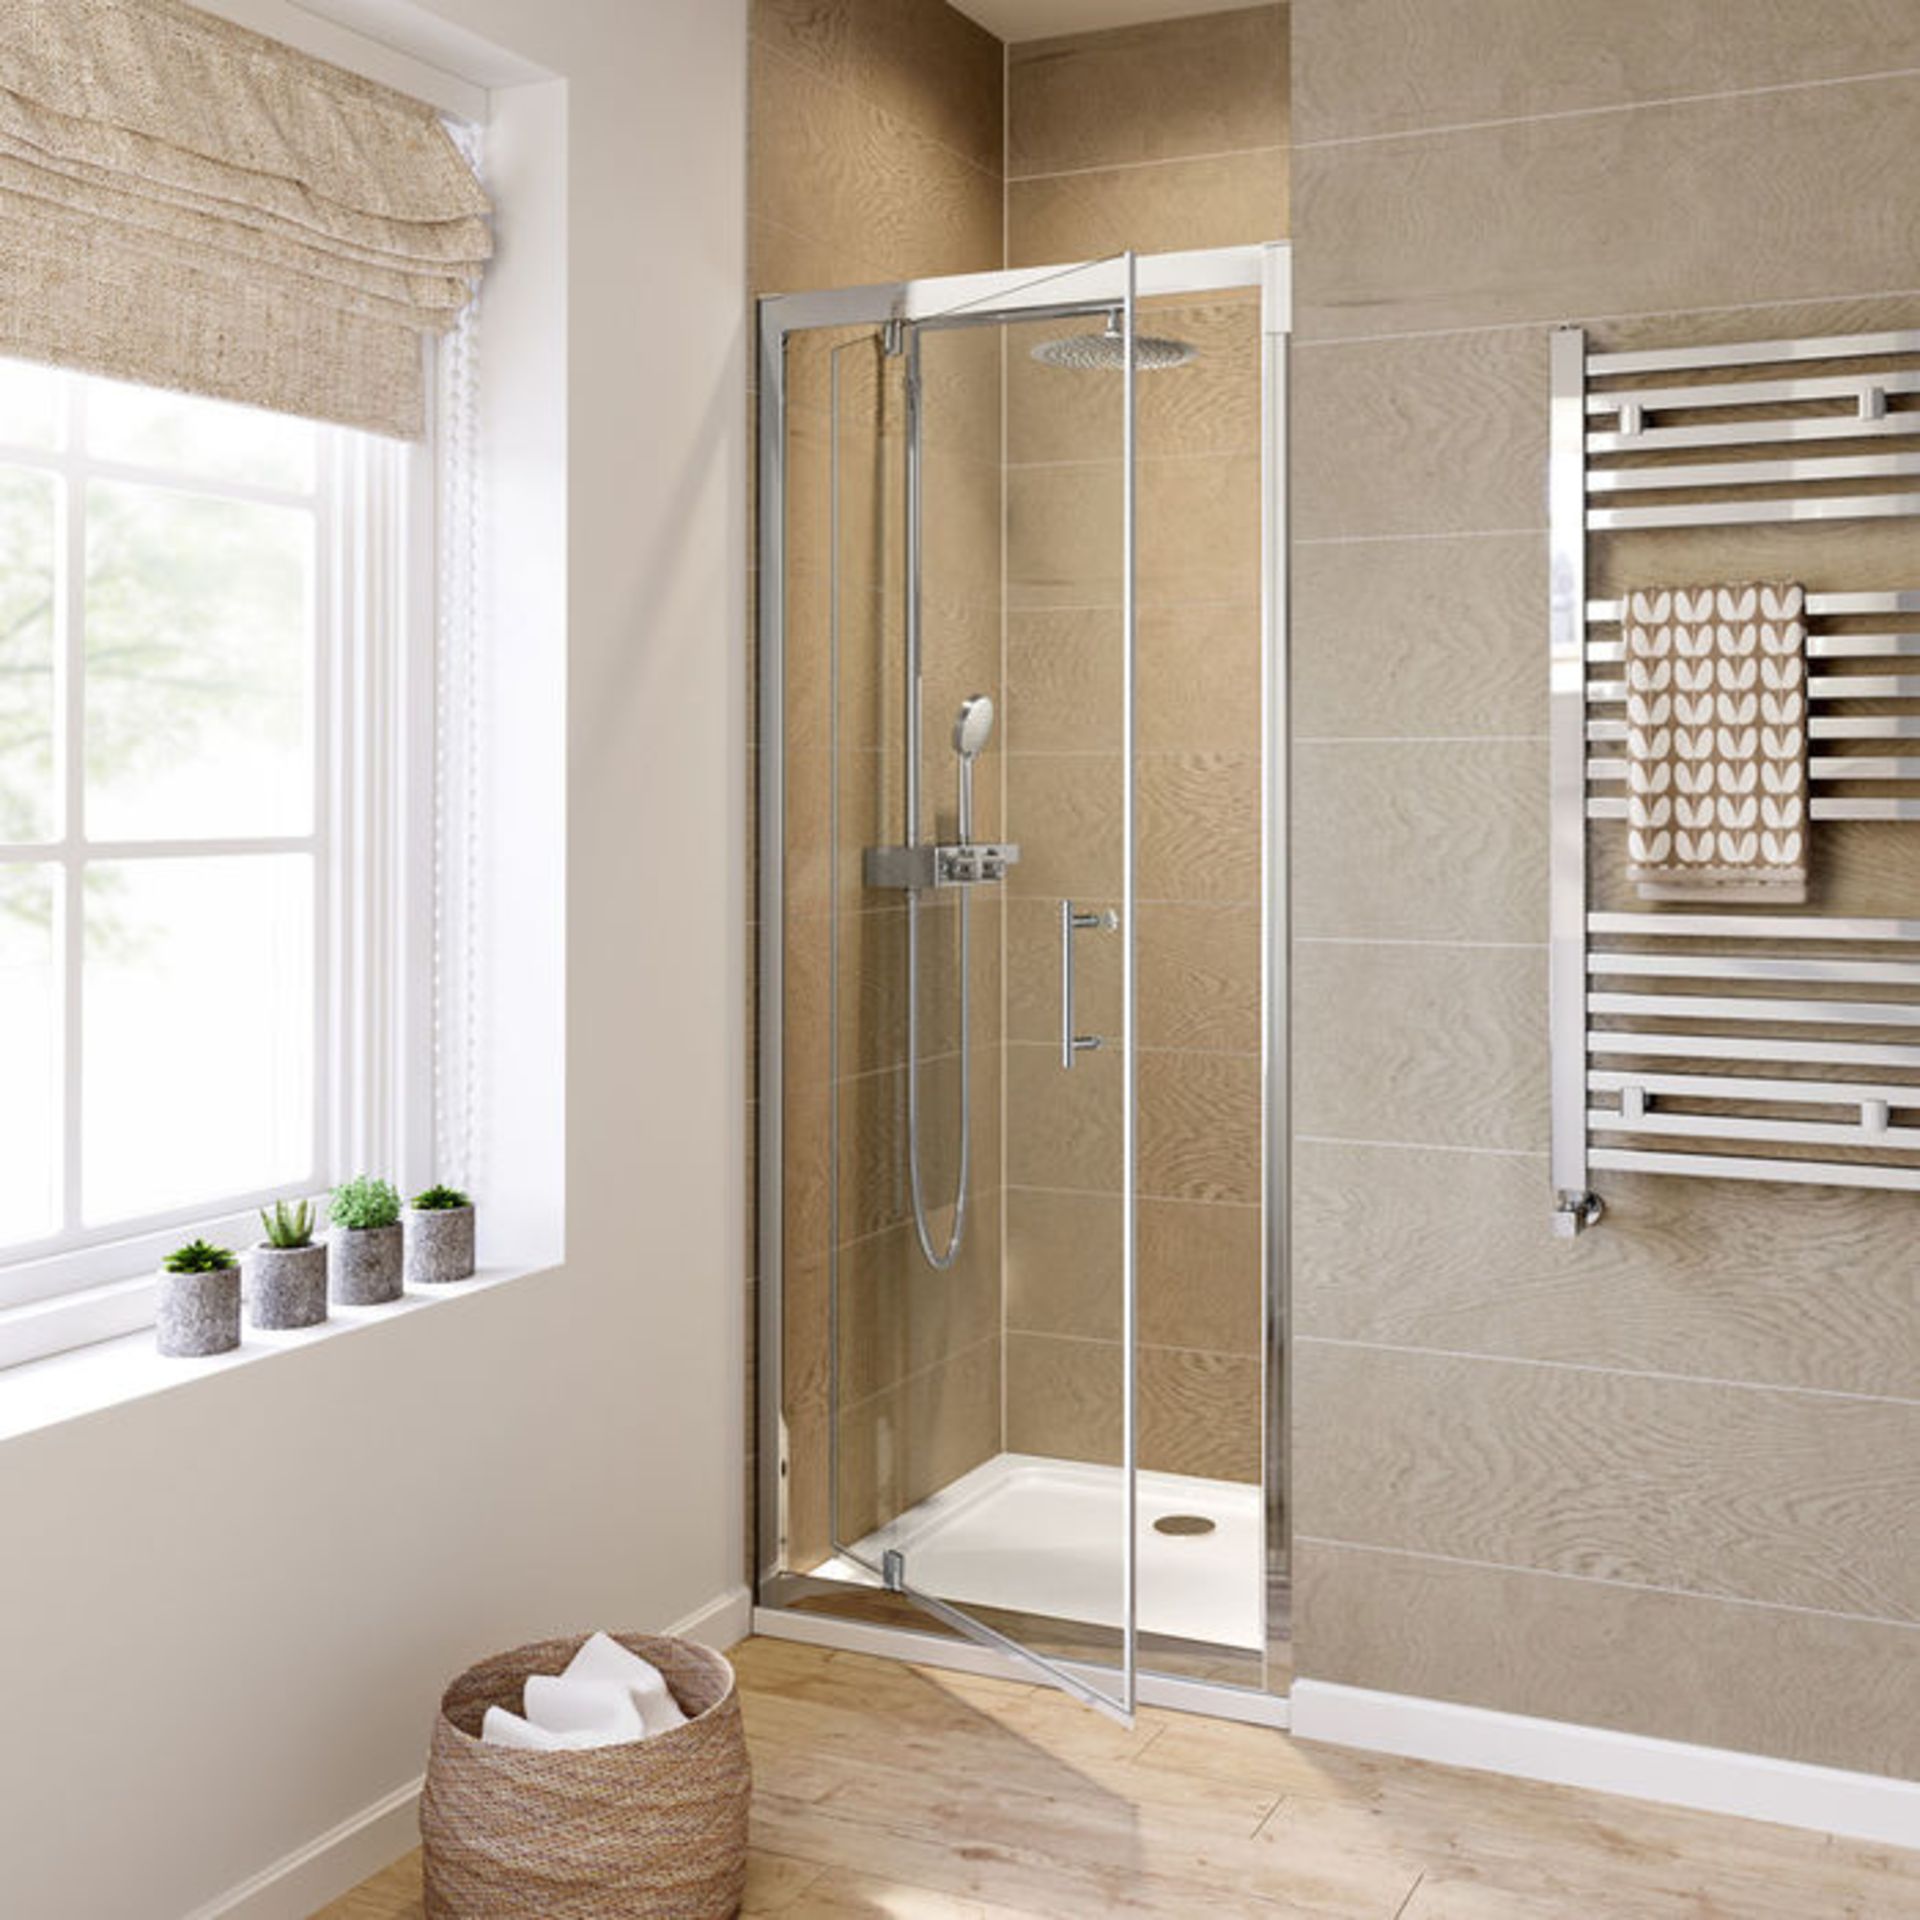 New Twyfords 6mm - Elements Pivot 760mm Shower Door 6mm Safety Glass Fully Waterproof Tested P... - Image 3 of 3